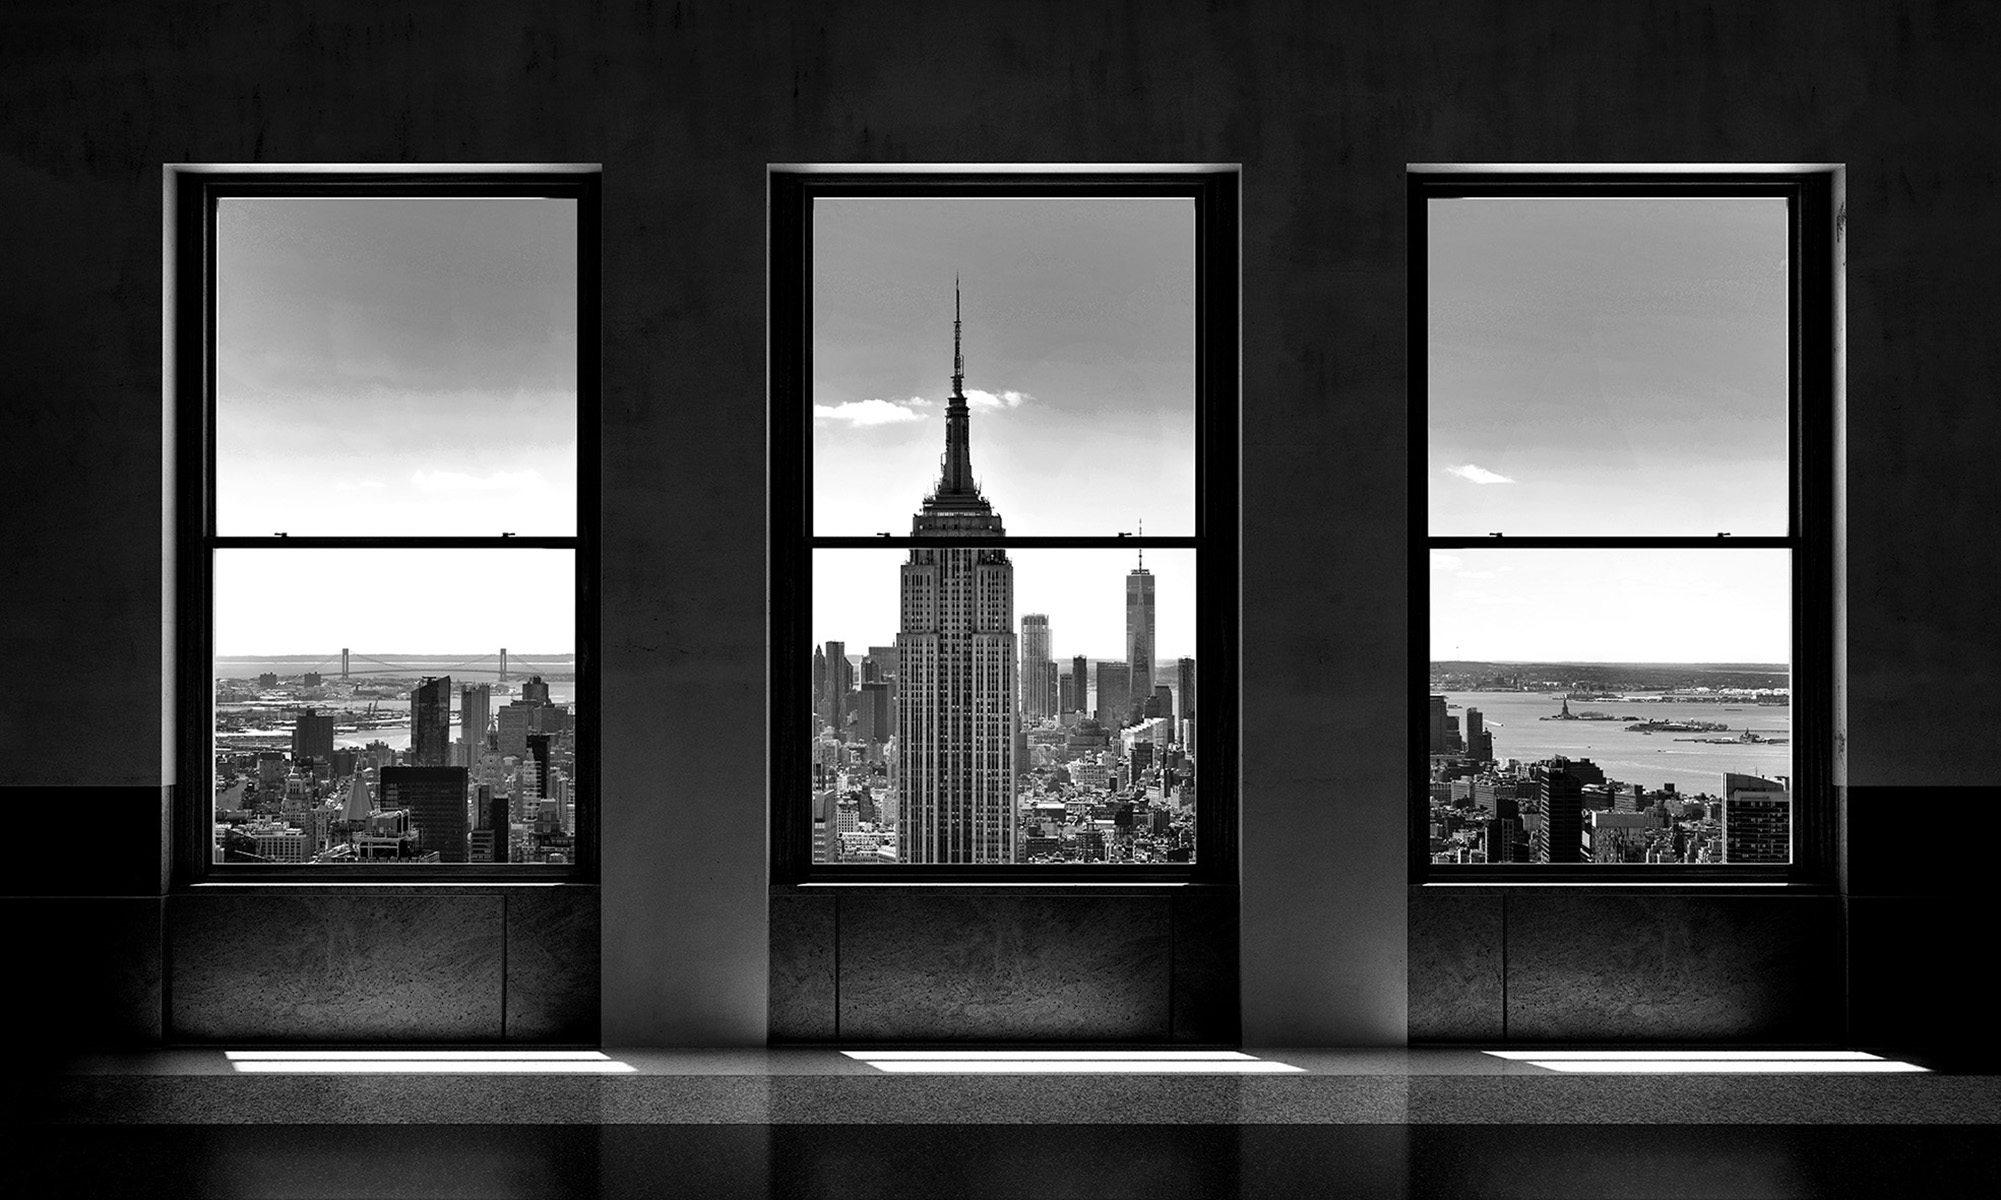 Photography made by Luc Dratwa in black and white - Windows 2.0 series - Moment 95x160cm